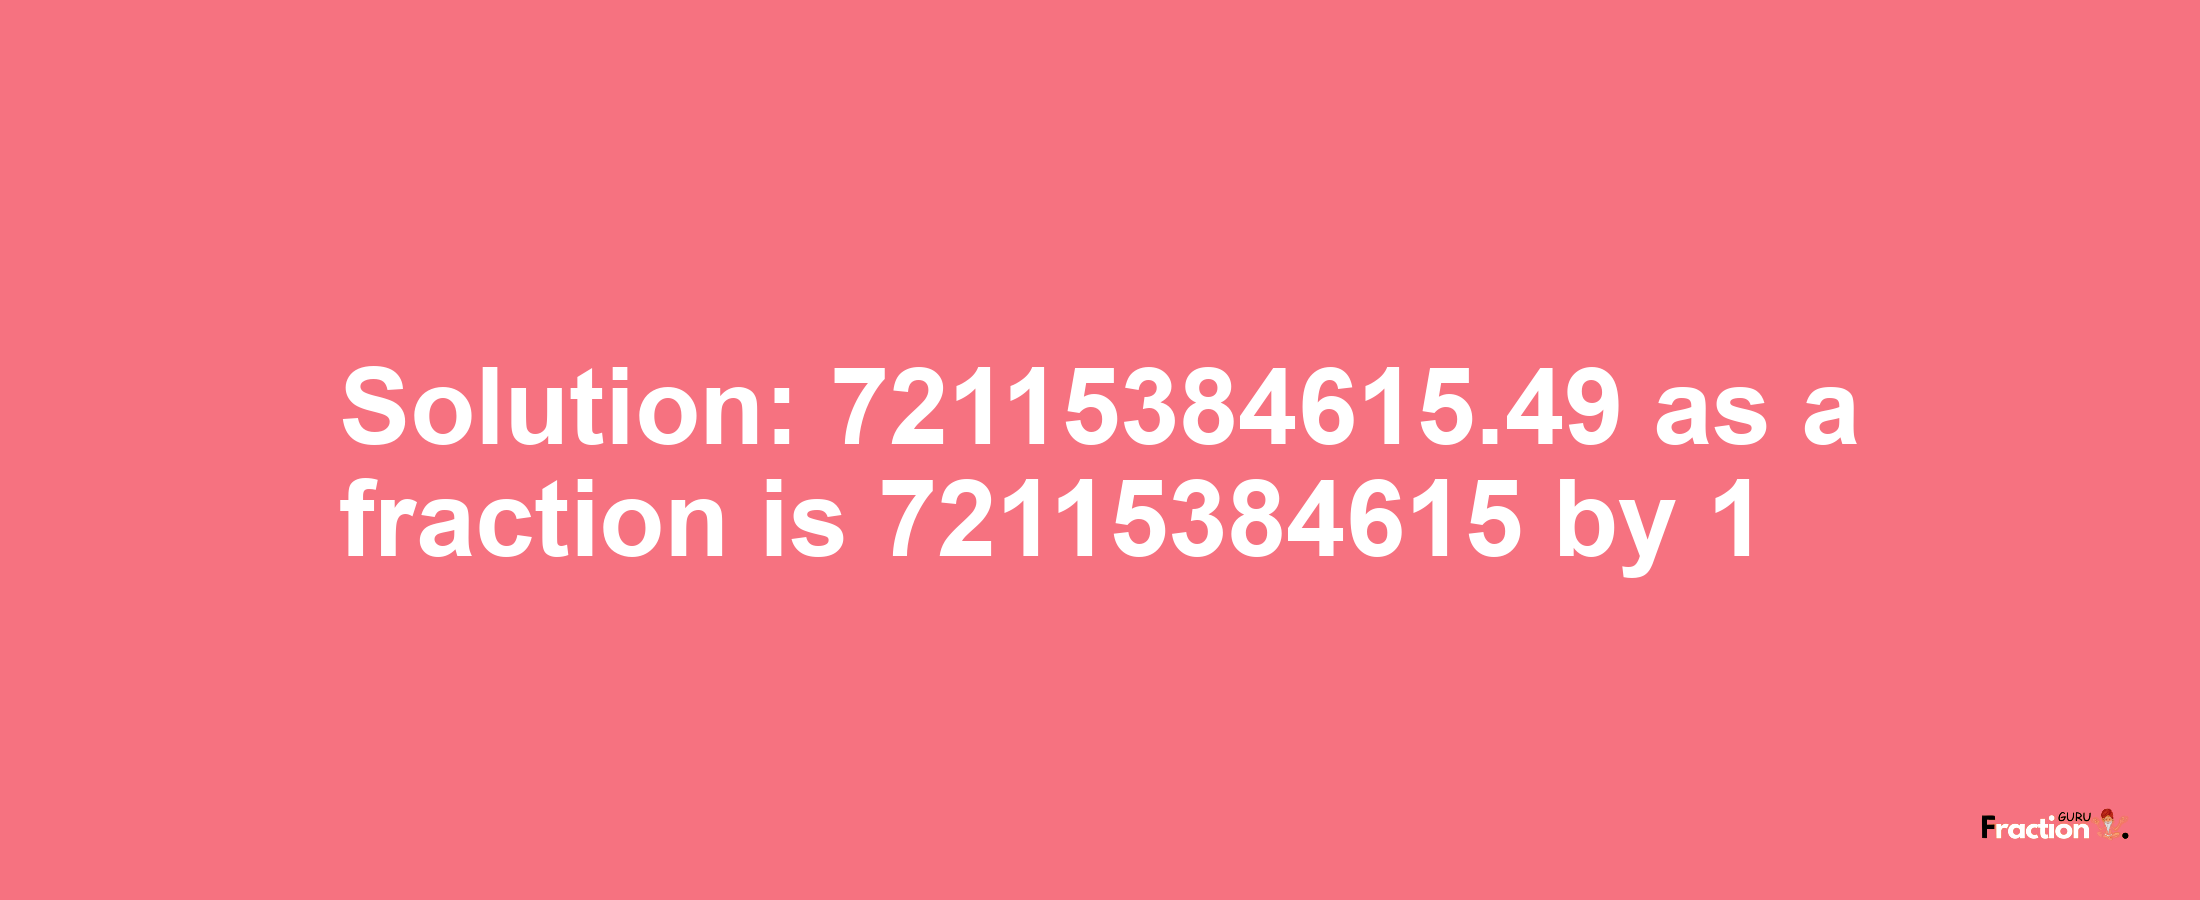 Solution:72115384615.49 as a fraction is 72115384615/1